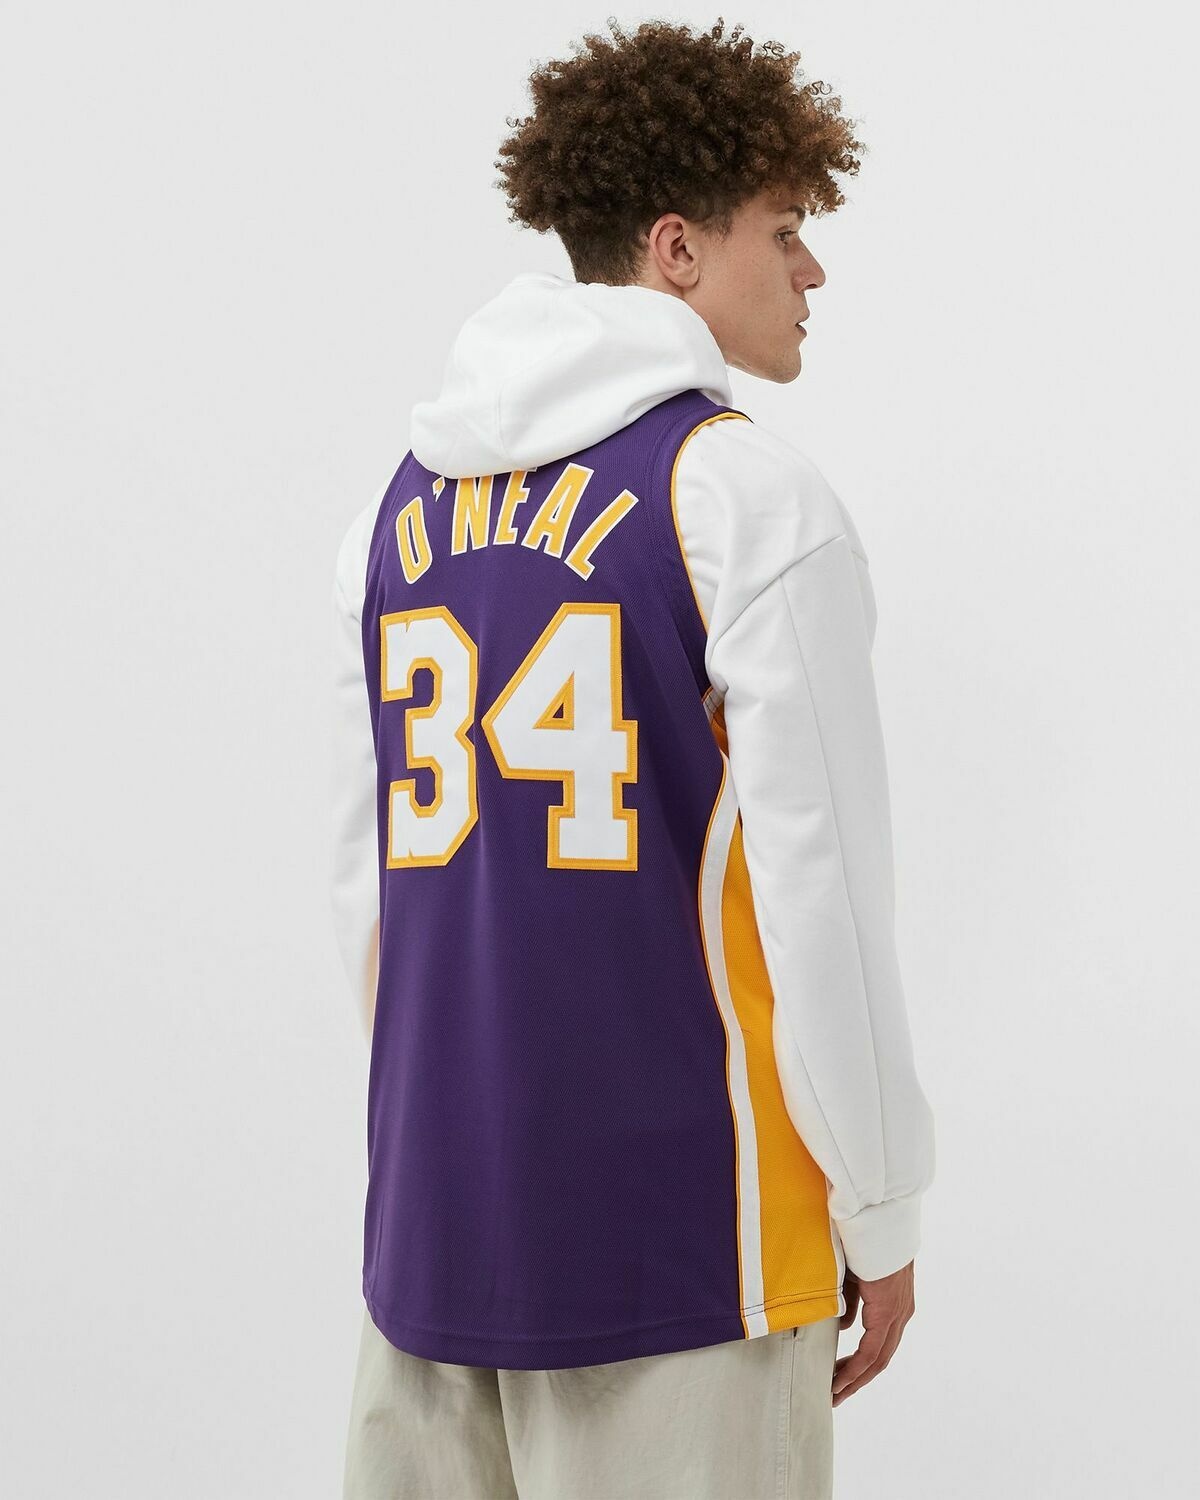 Mitchell & Ness Nba Authentic Finals Jersey Los Angeles Lakers 2001 02 Shaquille O'neal #34 Purple - Mens - Jerseys